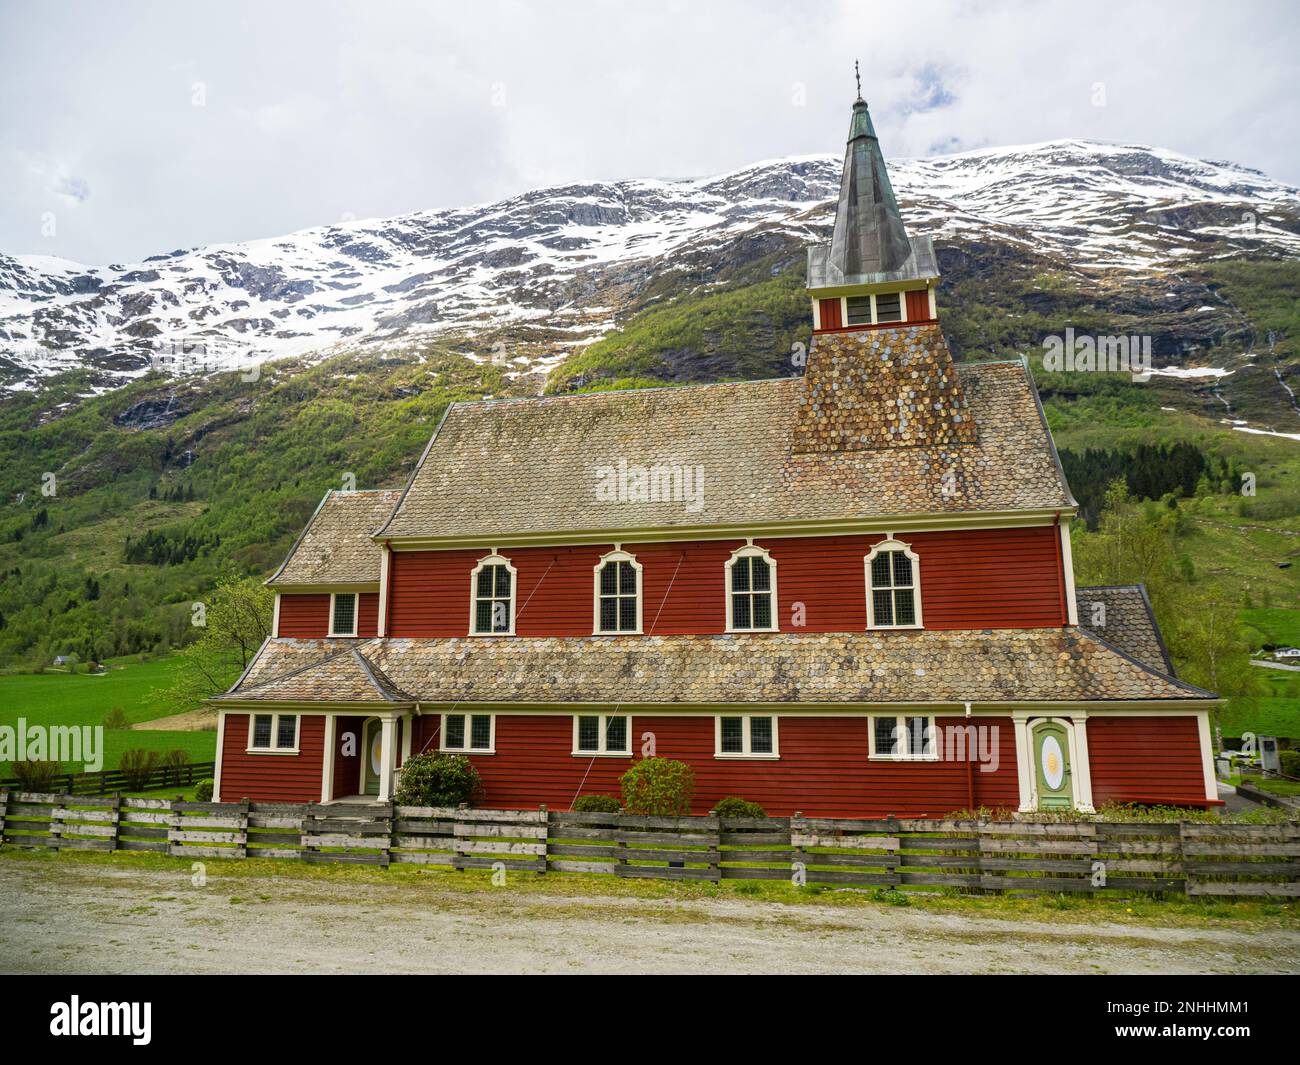 A view of the Olden Church, Norwegian: Olden kyrkje, within the Oldedalen River Valley, Norway. Stock Photo